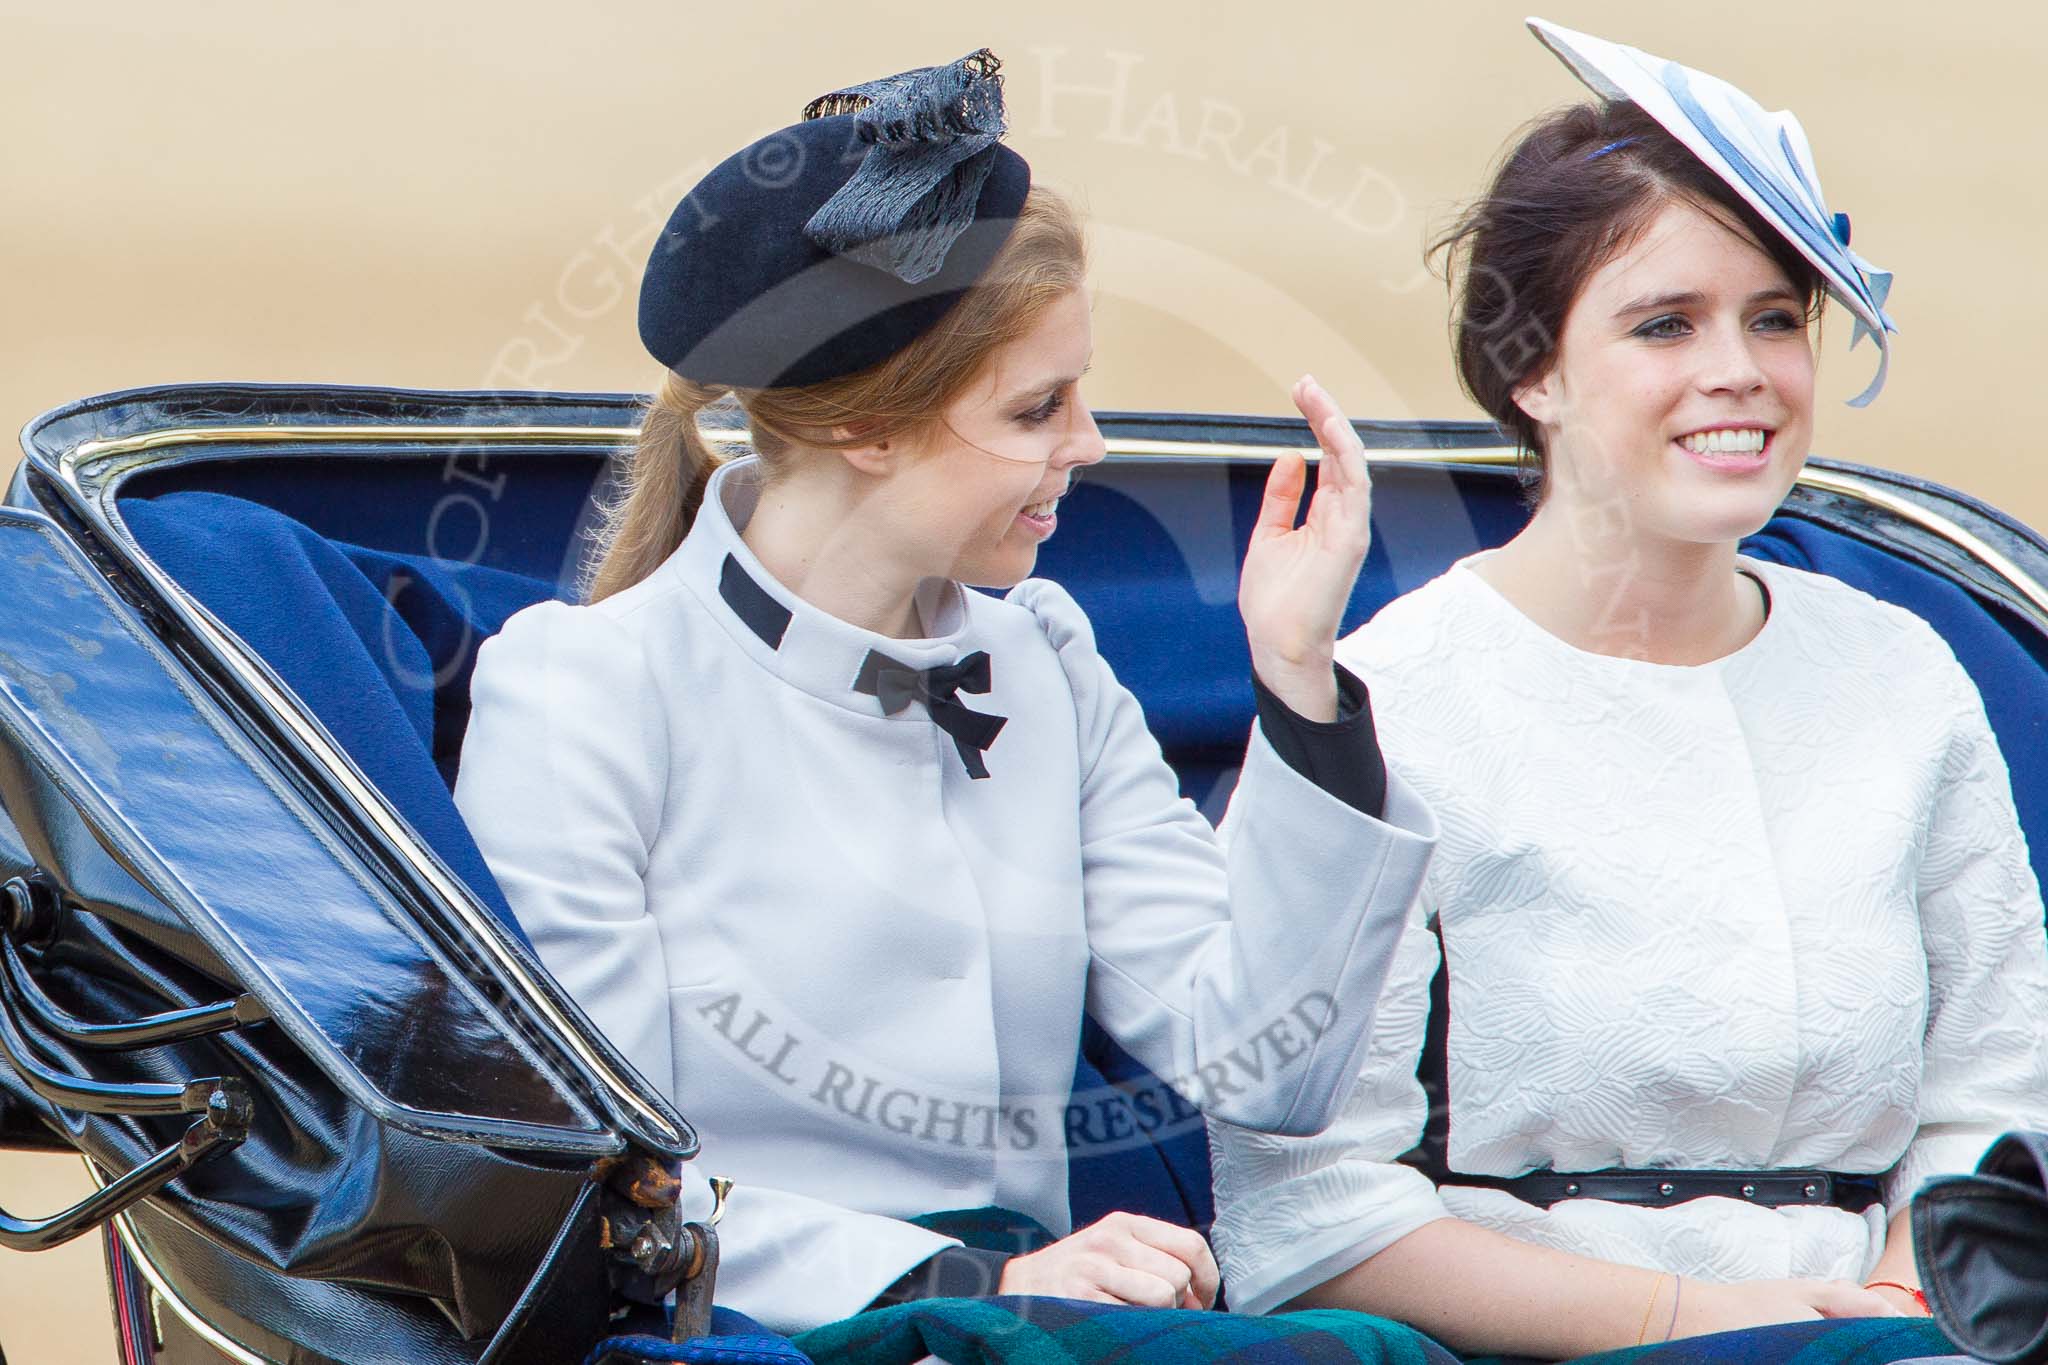 Trooping the Colour 2013: HRH Princess Beatrice of York and HRH Princess Eugenie of York in the second barouche carriage on the way across Horse Guards Parade to watch the parade from the Major General's office..
Horse Guards Parade, Westminster,
London SW1,

United Kingdom,
on 15 June 2013 at 10:50, image #211